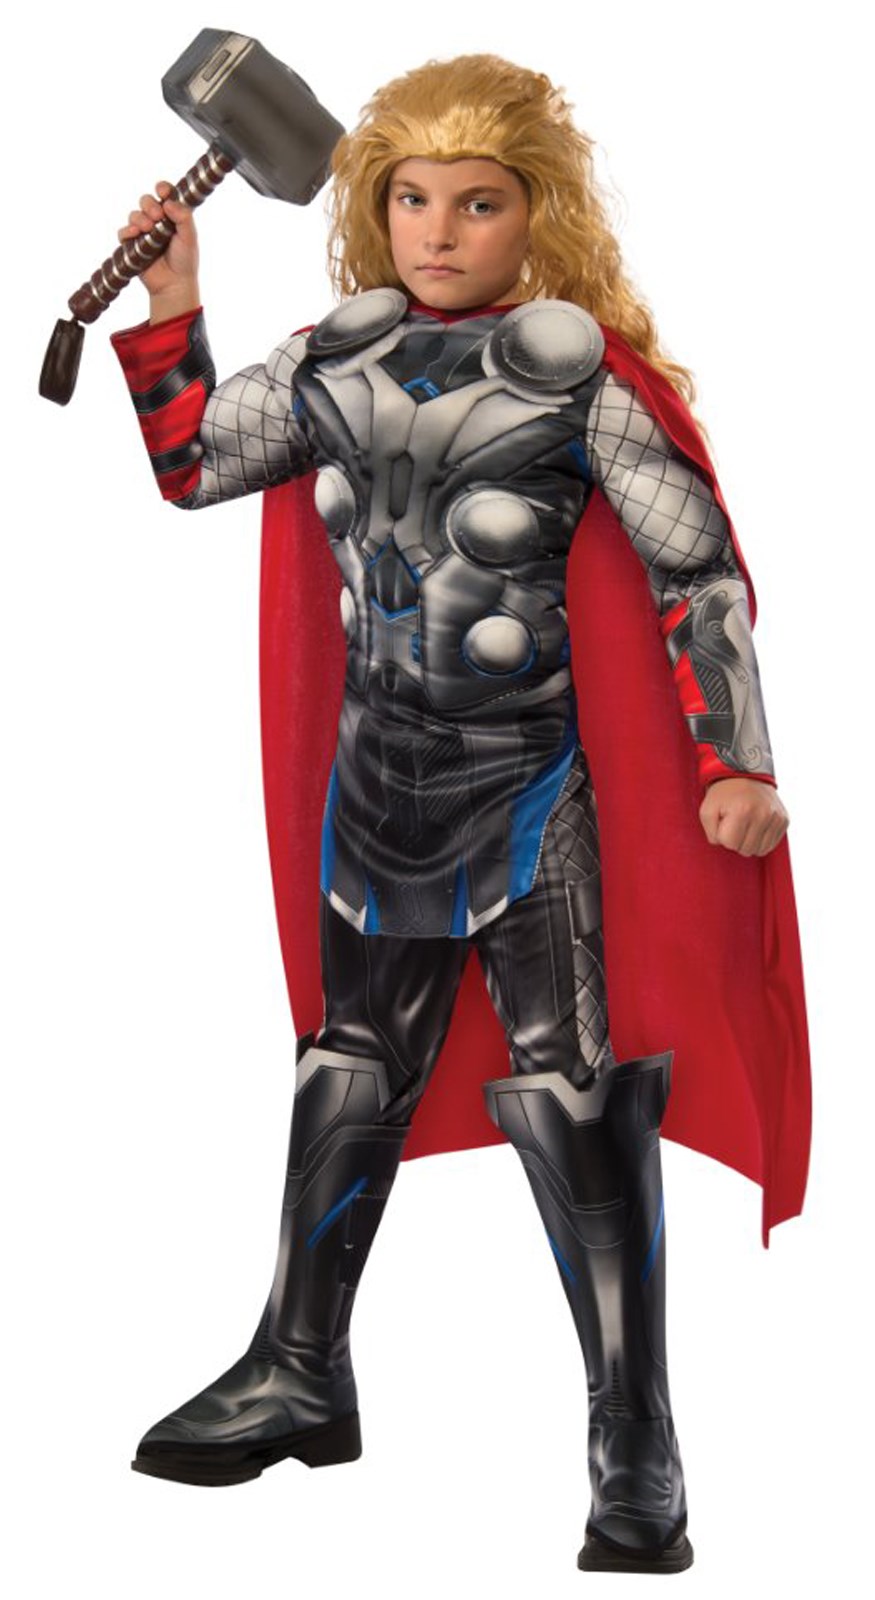 Avengers 2 - Age of Ultron: Deluxe Thor Kids Costume